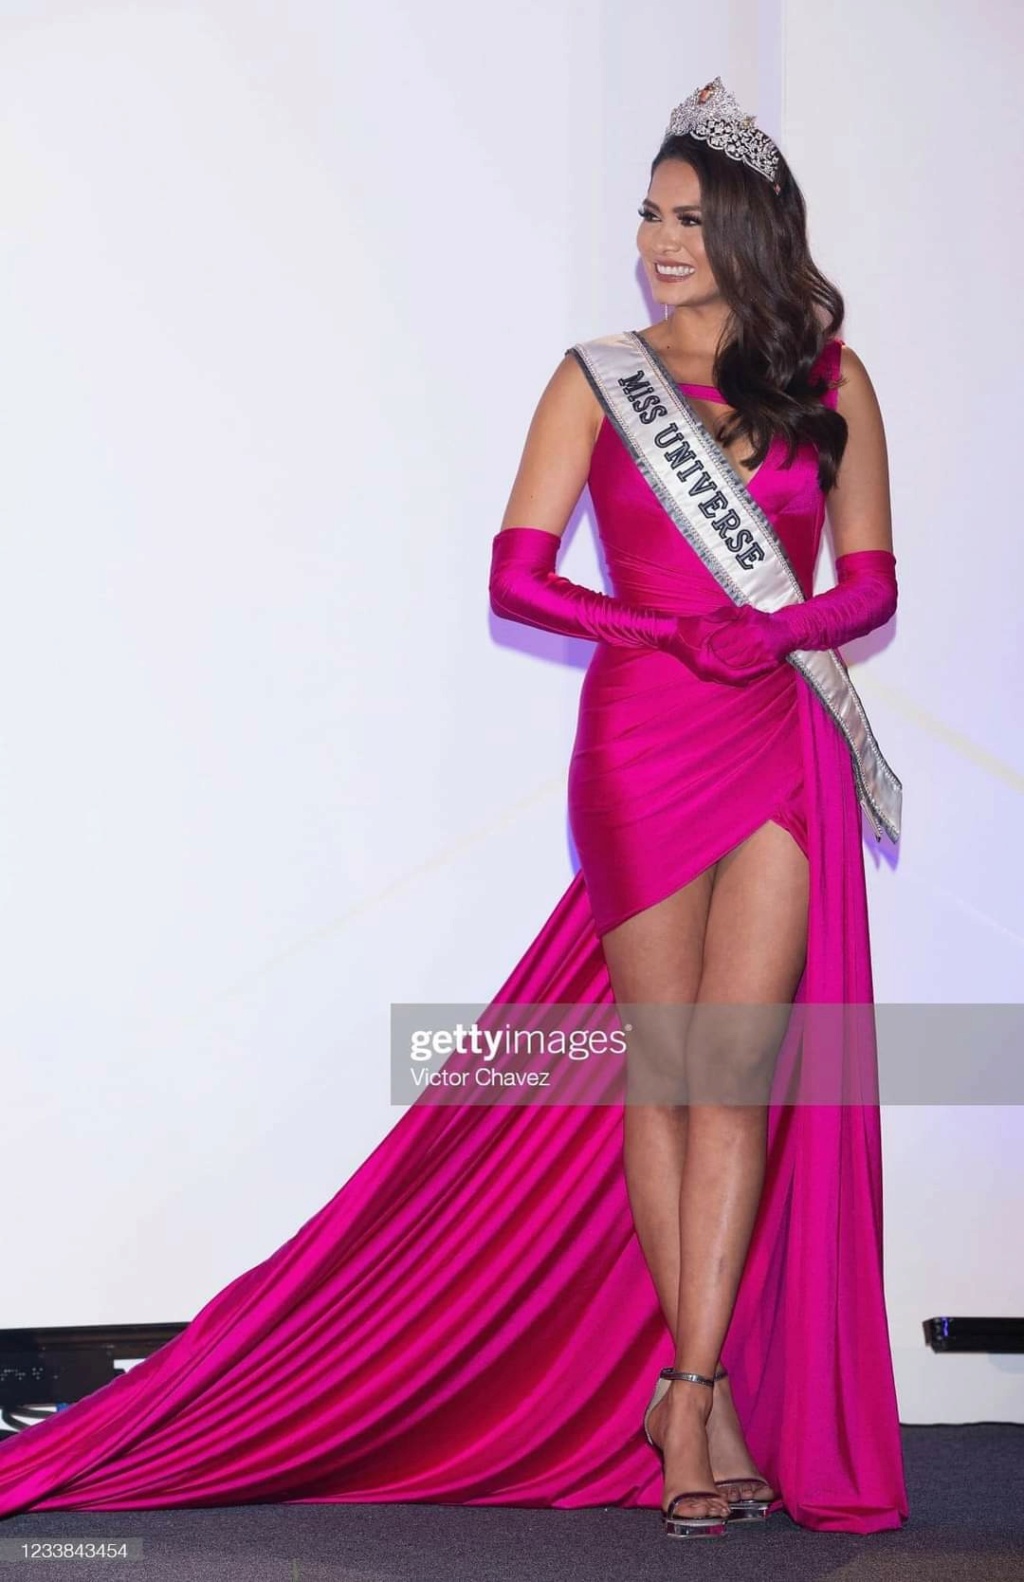 The Official Thread Of Miss Universe 2020 - Andrea Meza of Mexico  - Page 3 Fb_18355